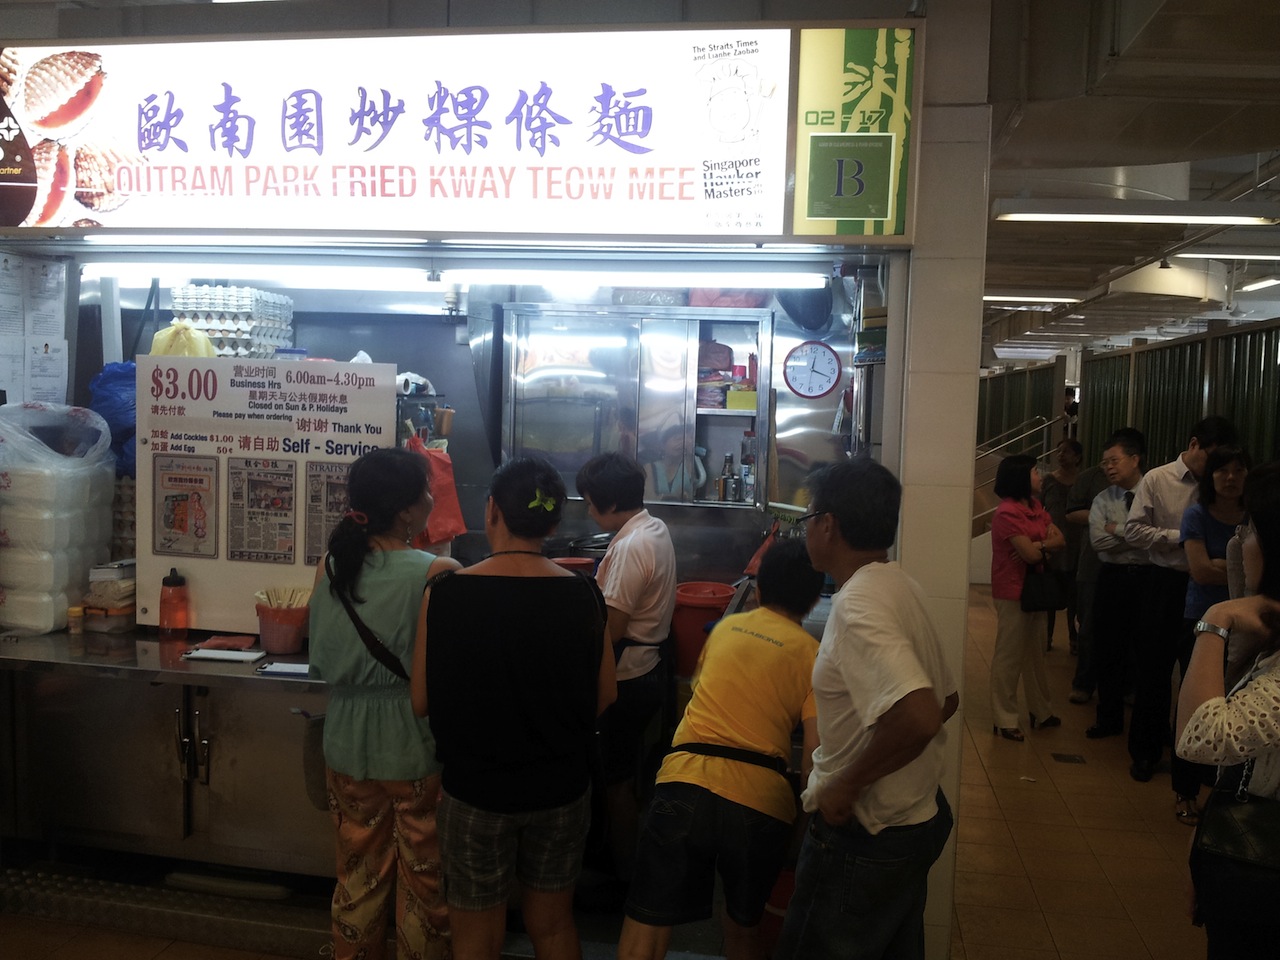 Long queue at a very famous fried kway teow stall!!!